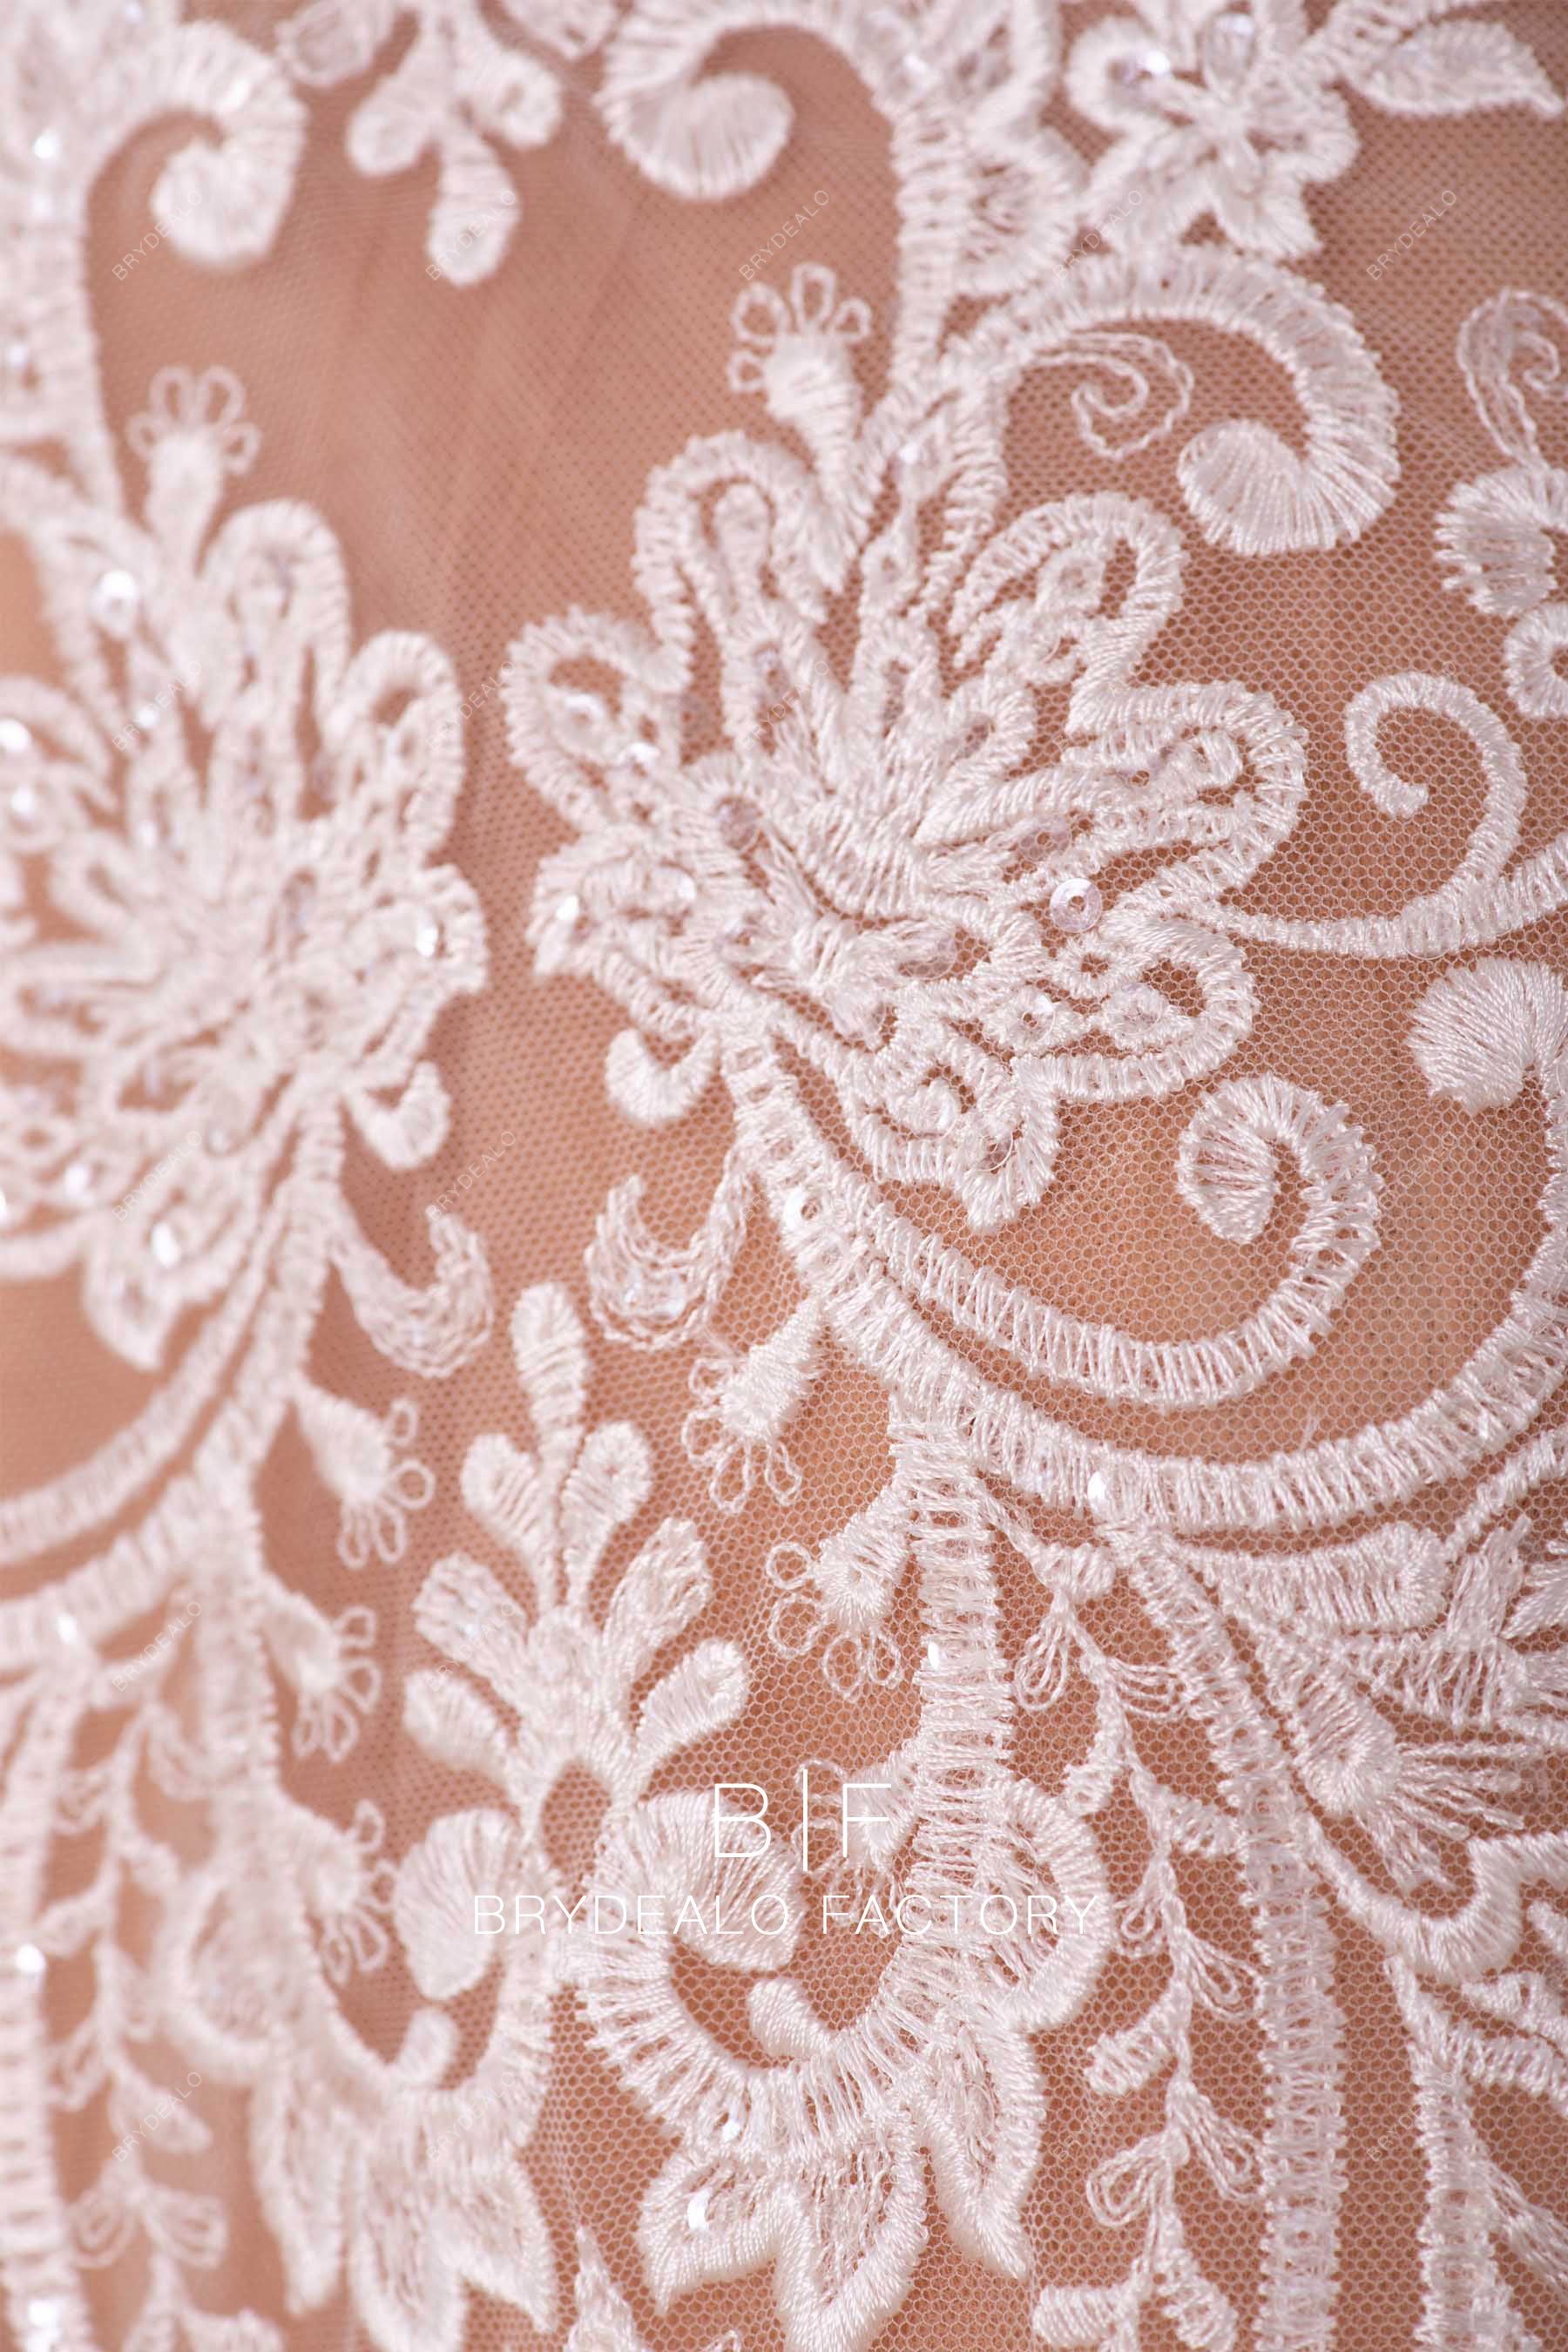 high quality shimmery lace fabric online